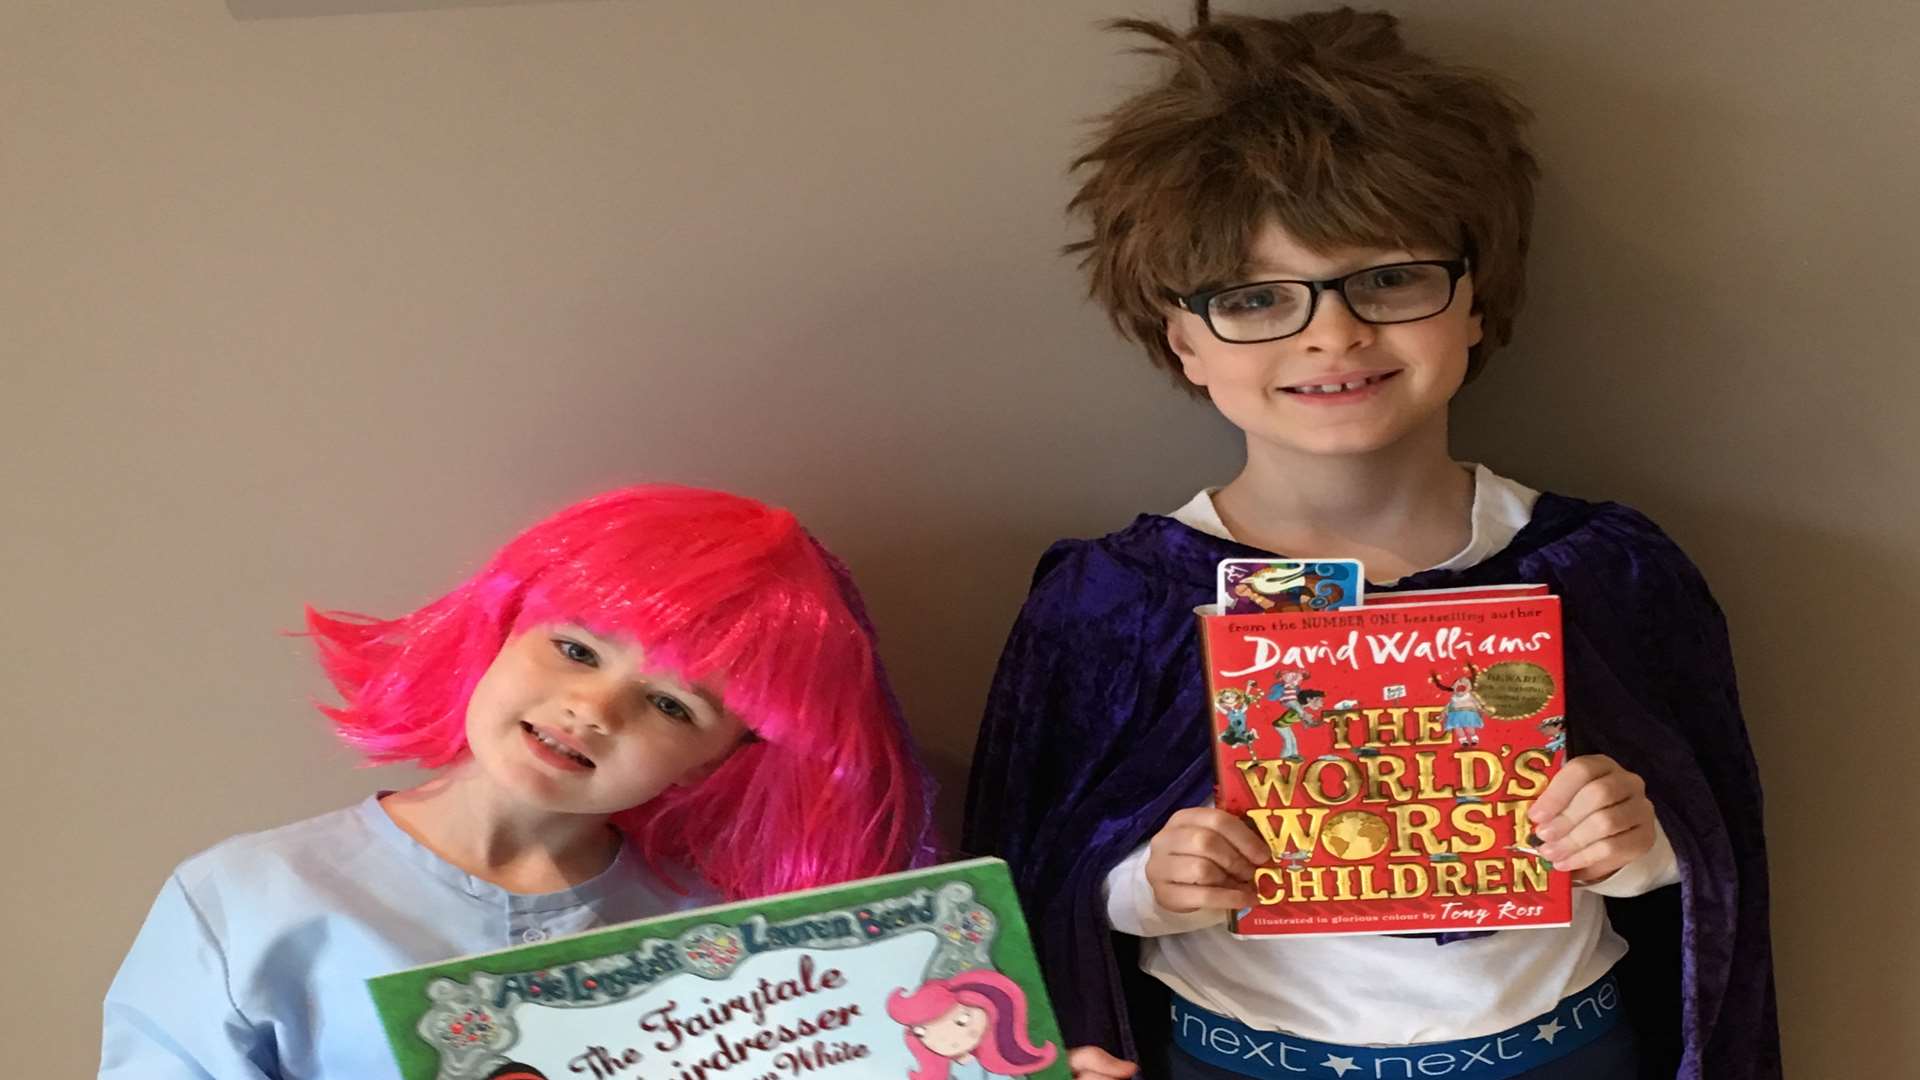 Oliver is Nigel Nit Boy (David Walliams worlds worst children) aged 7 and Lucy is Kitty Lacey the fairytale hairdresser aged 5! From Maidstone